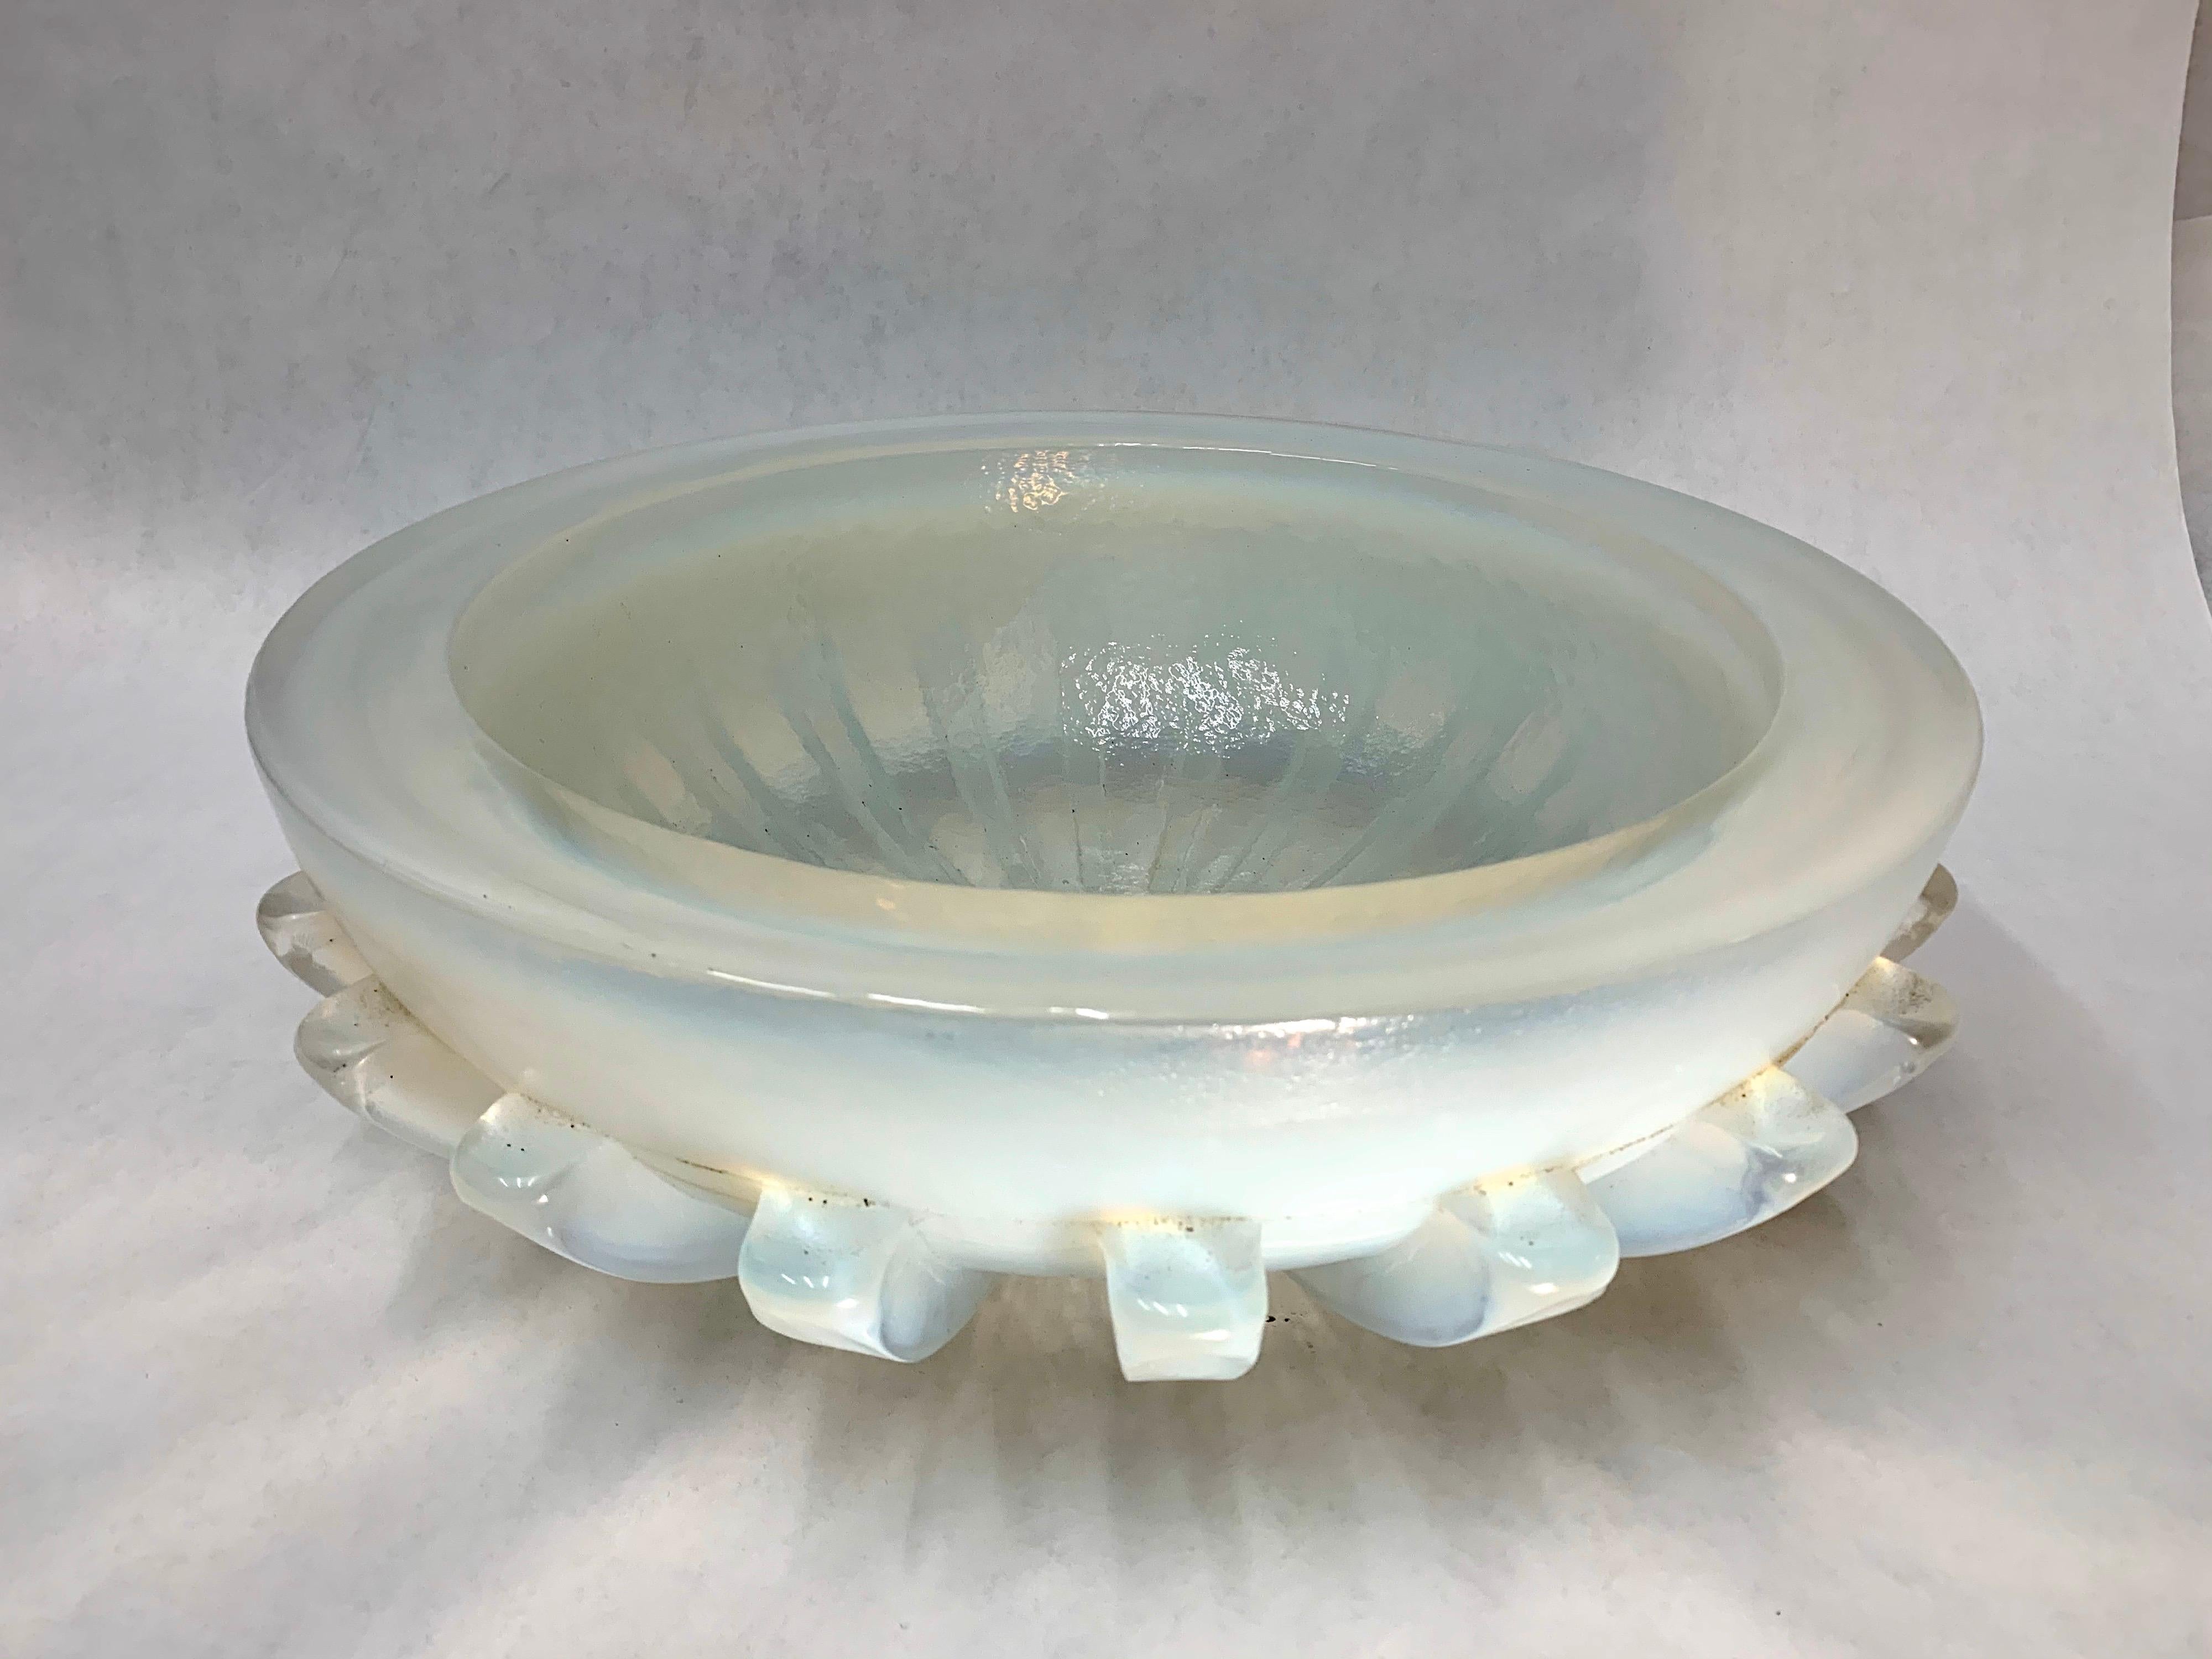 Massive Iridescent Opaline Murano Glass Bowl with Buttress Accents 7